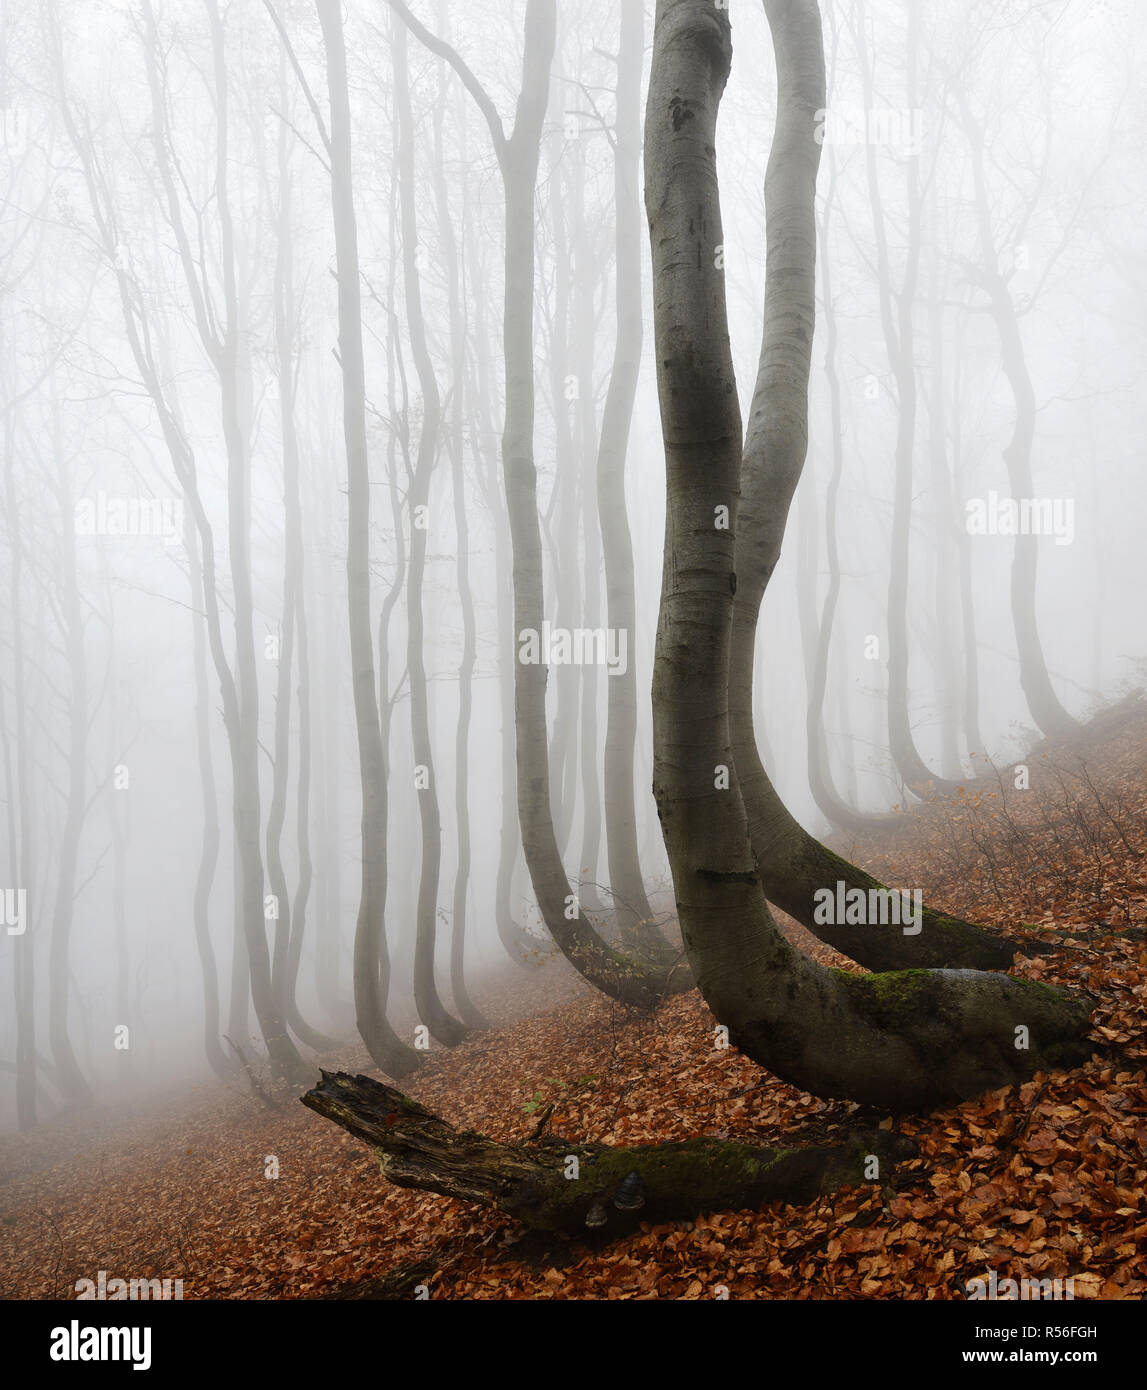 Mysterious forest in the fog, bizarrely overgrown bare beeches with curved trunks, autumn, Ore Mountains, Czech Republic Stock Photo